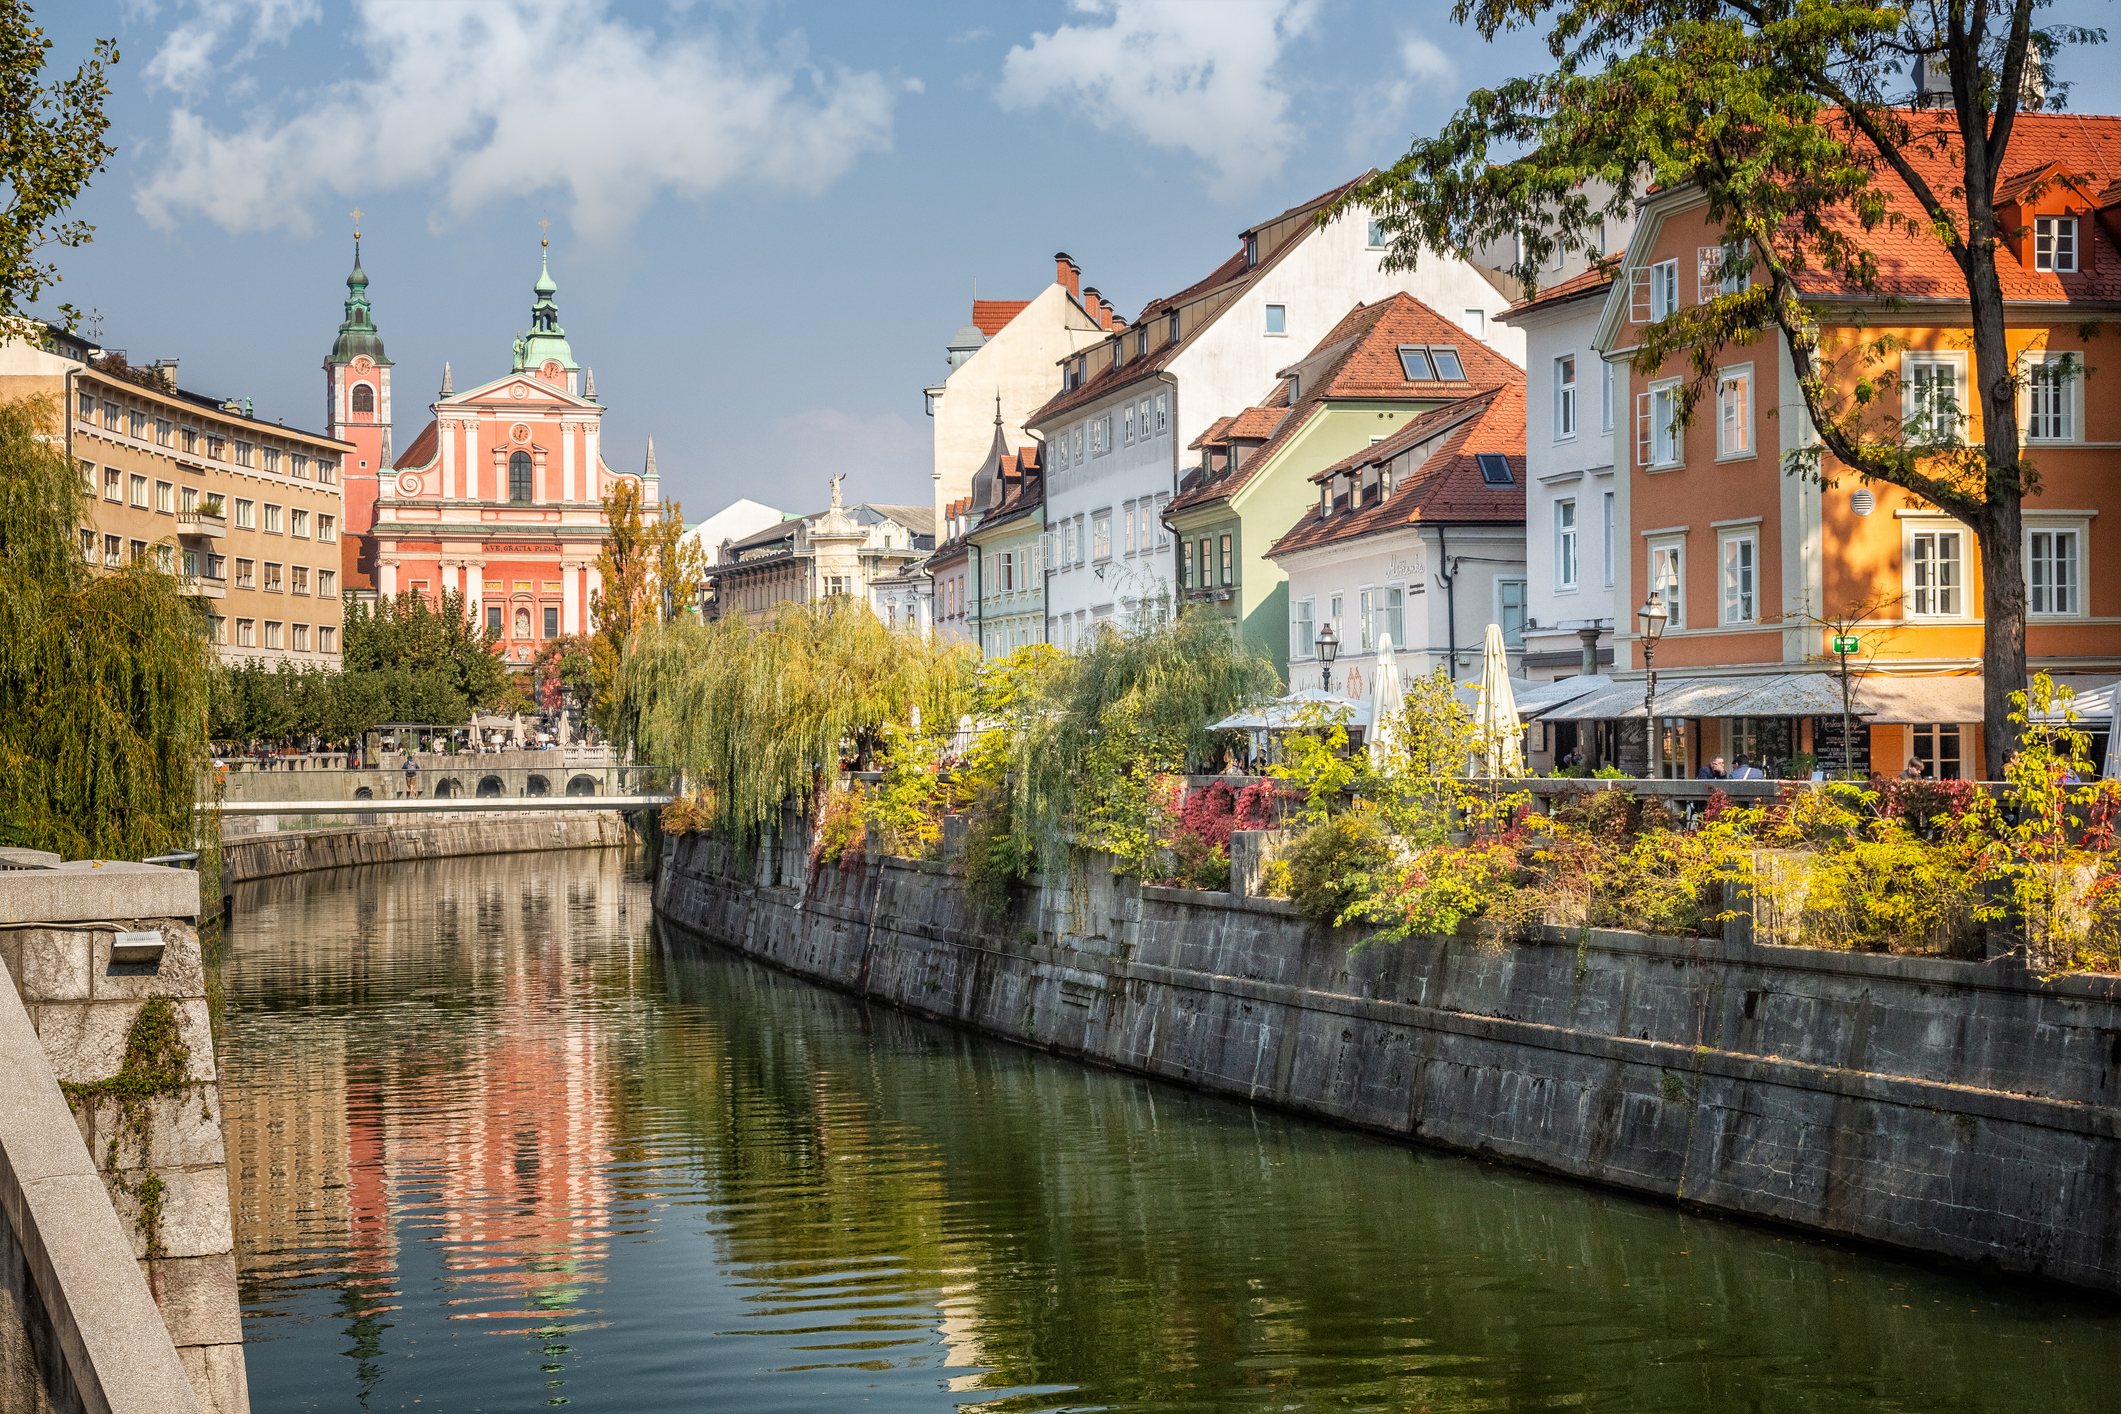 View of Ljubljana’s canal with historic buildings and the Franciscan Church of the Annunciation